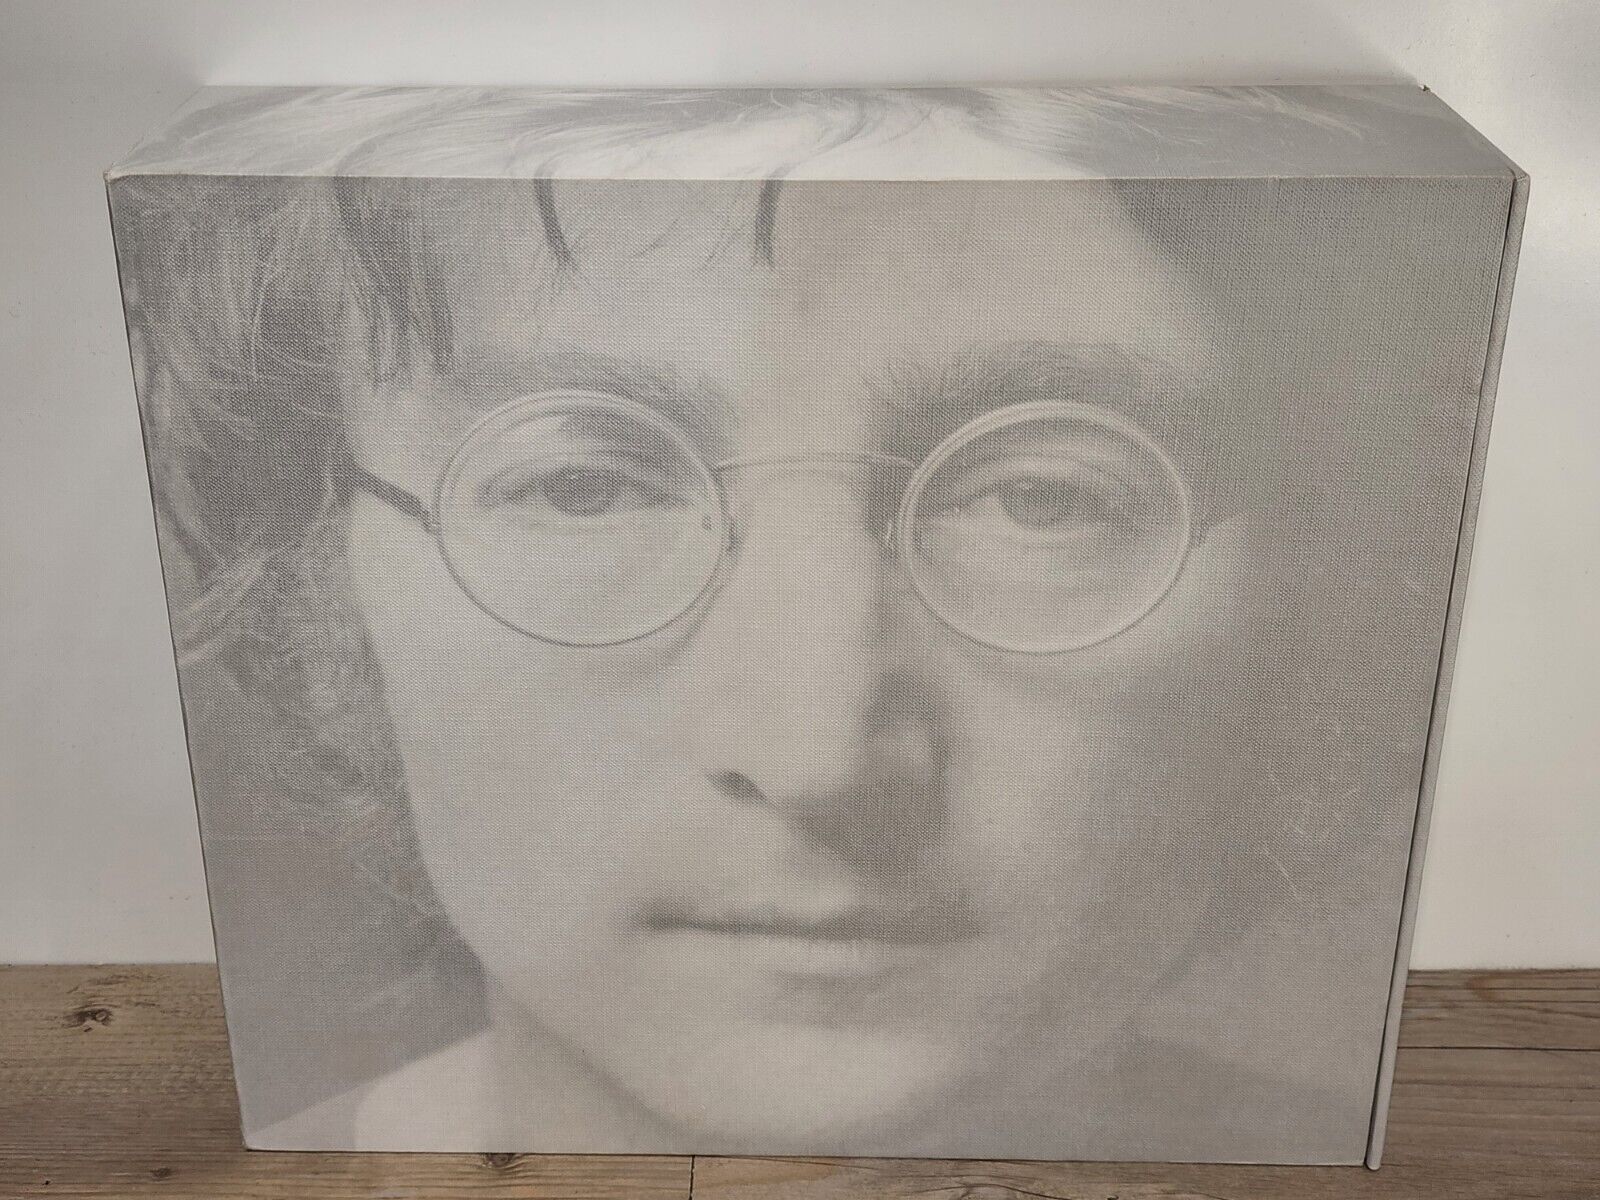 JOHN LENNON Box Of Vision Limited Edition Time Capsule CD Storage & Art Book 